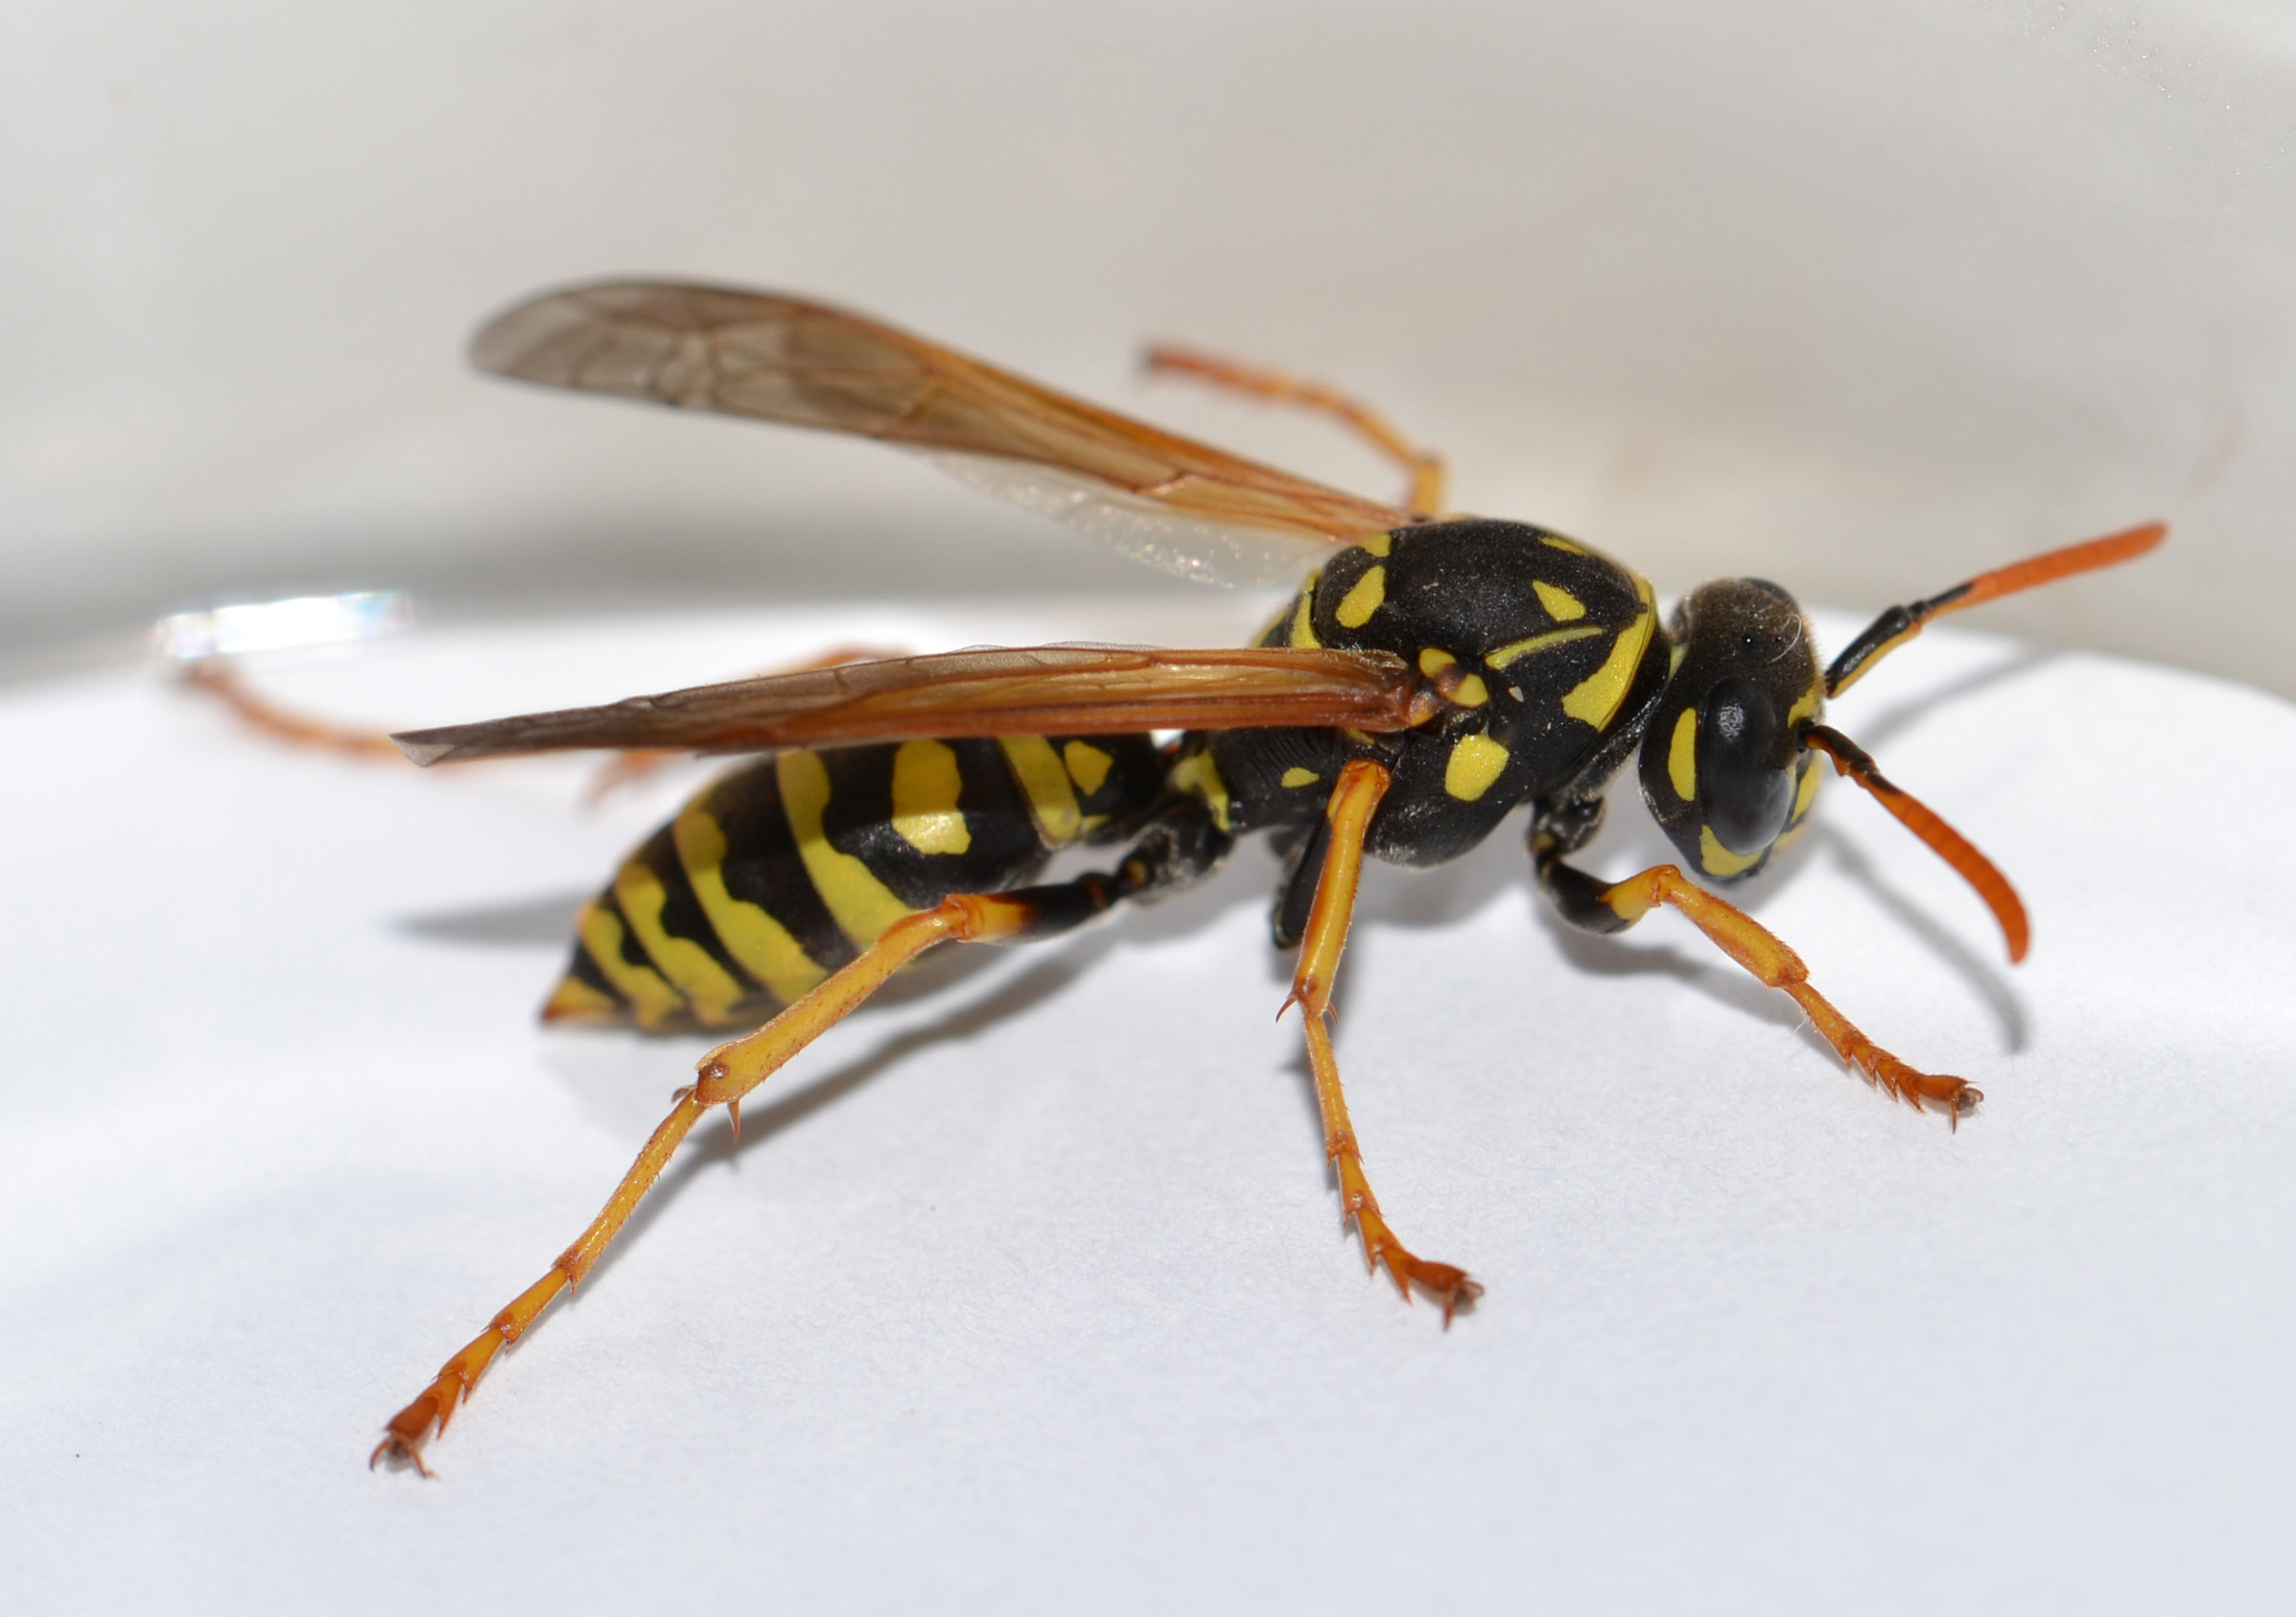 Used with permission from Eric Engh. http://msmosquito.com/the-bug-blog/2011/08/european-paper-wasp